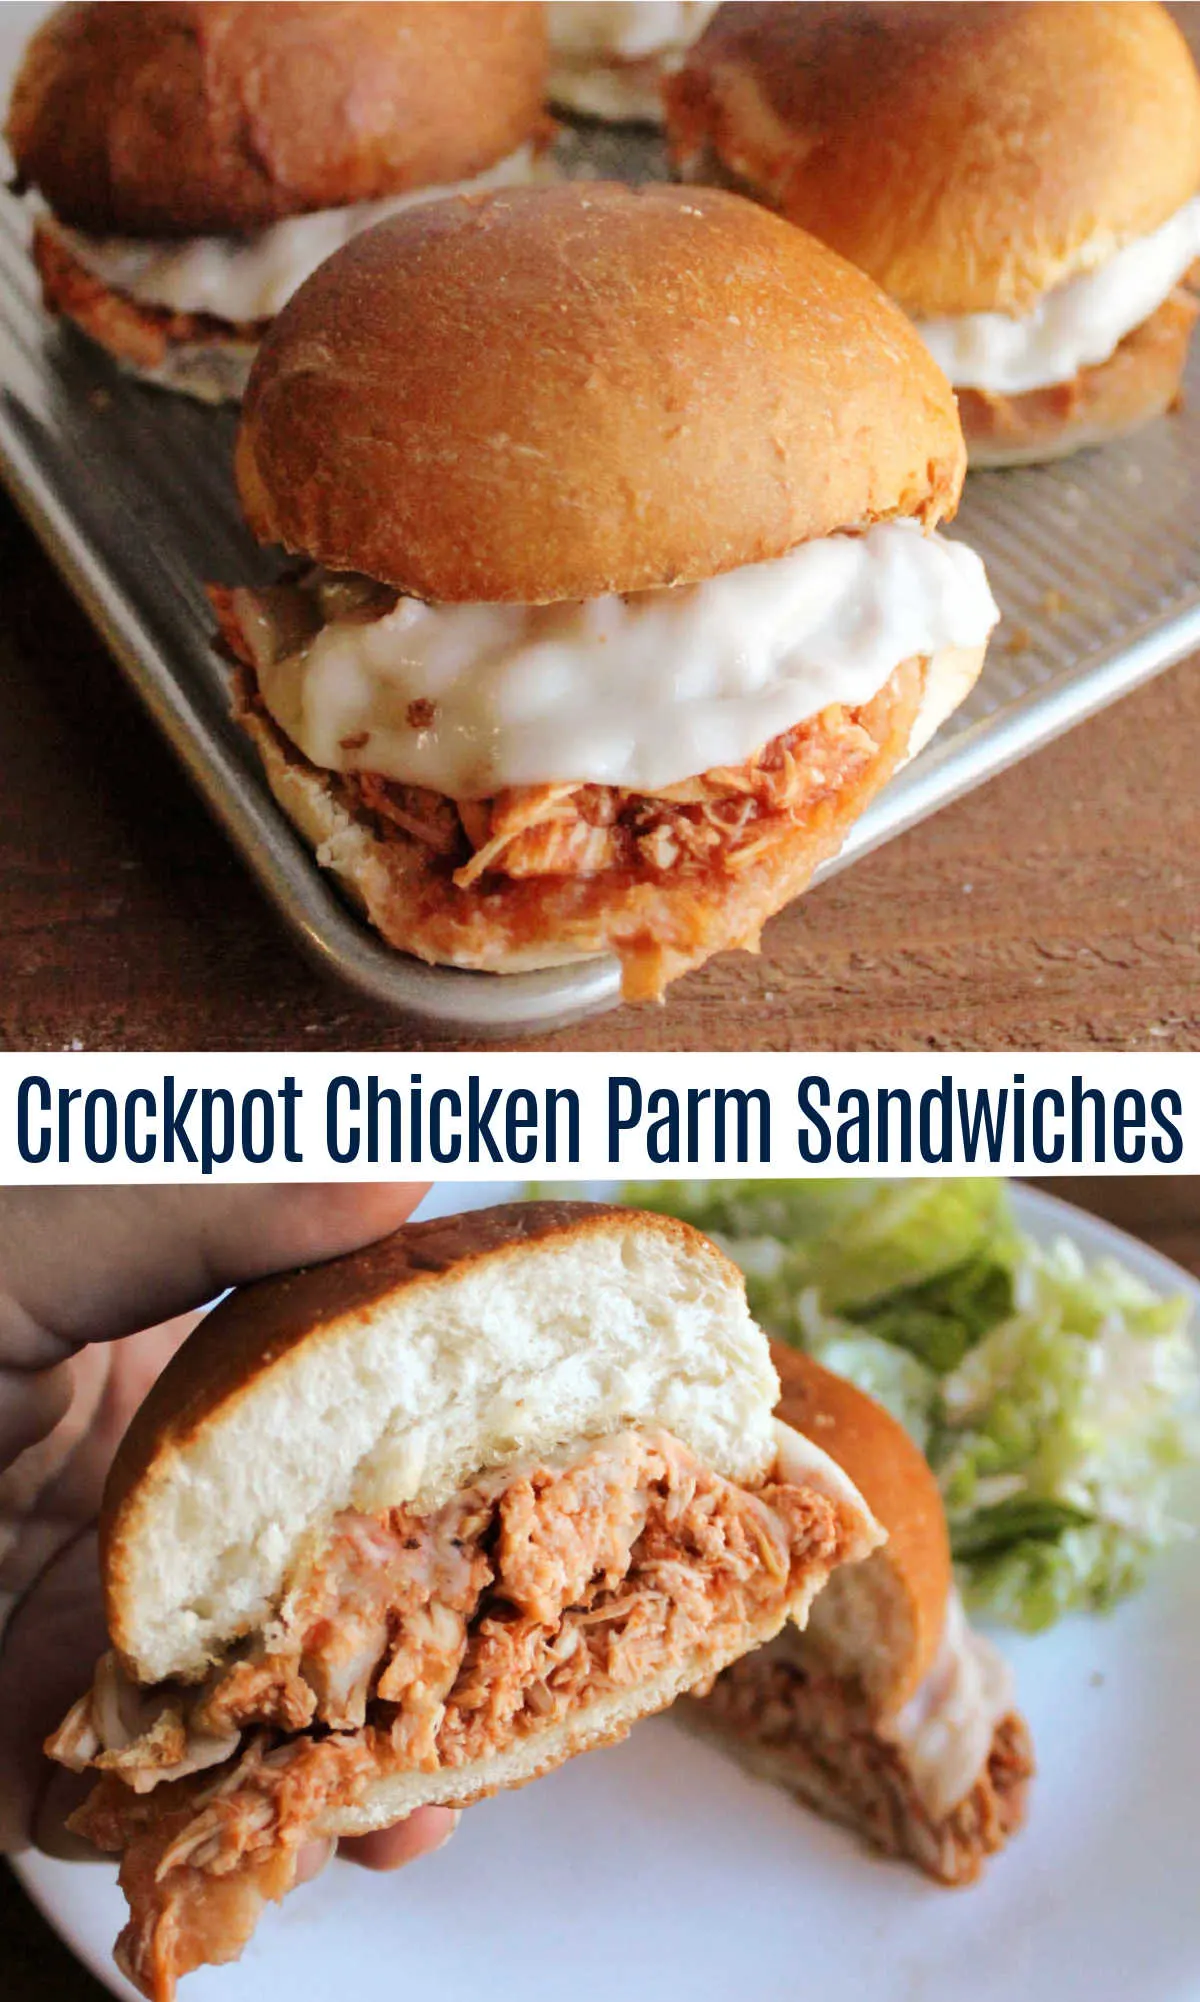 Crockpot chicken Parmesan sandwiches a perfect dinner for busy nights. The chicken cooks in the slow cooker all day so all you have to do is shred it and assemble the sandwiches when you get home.